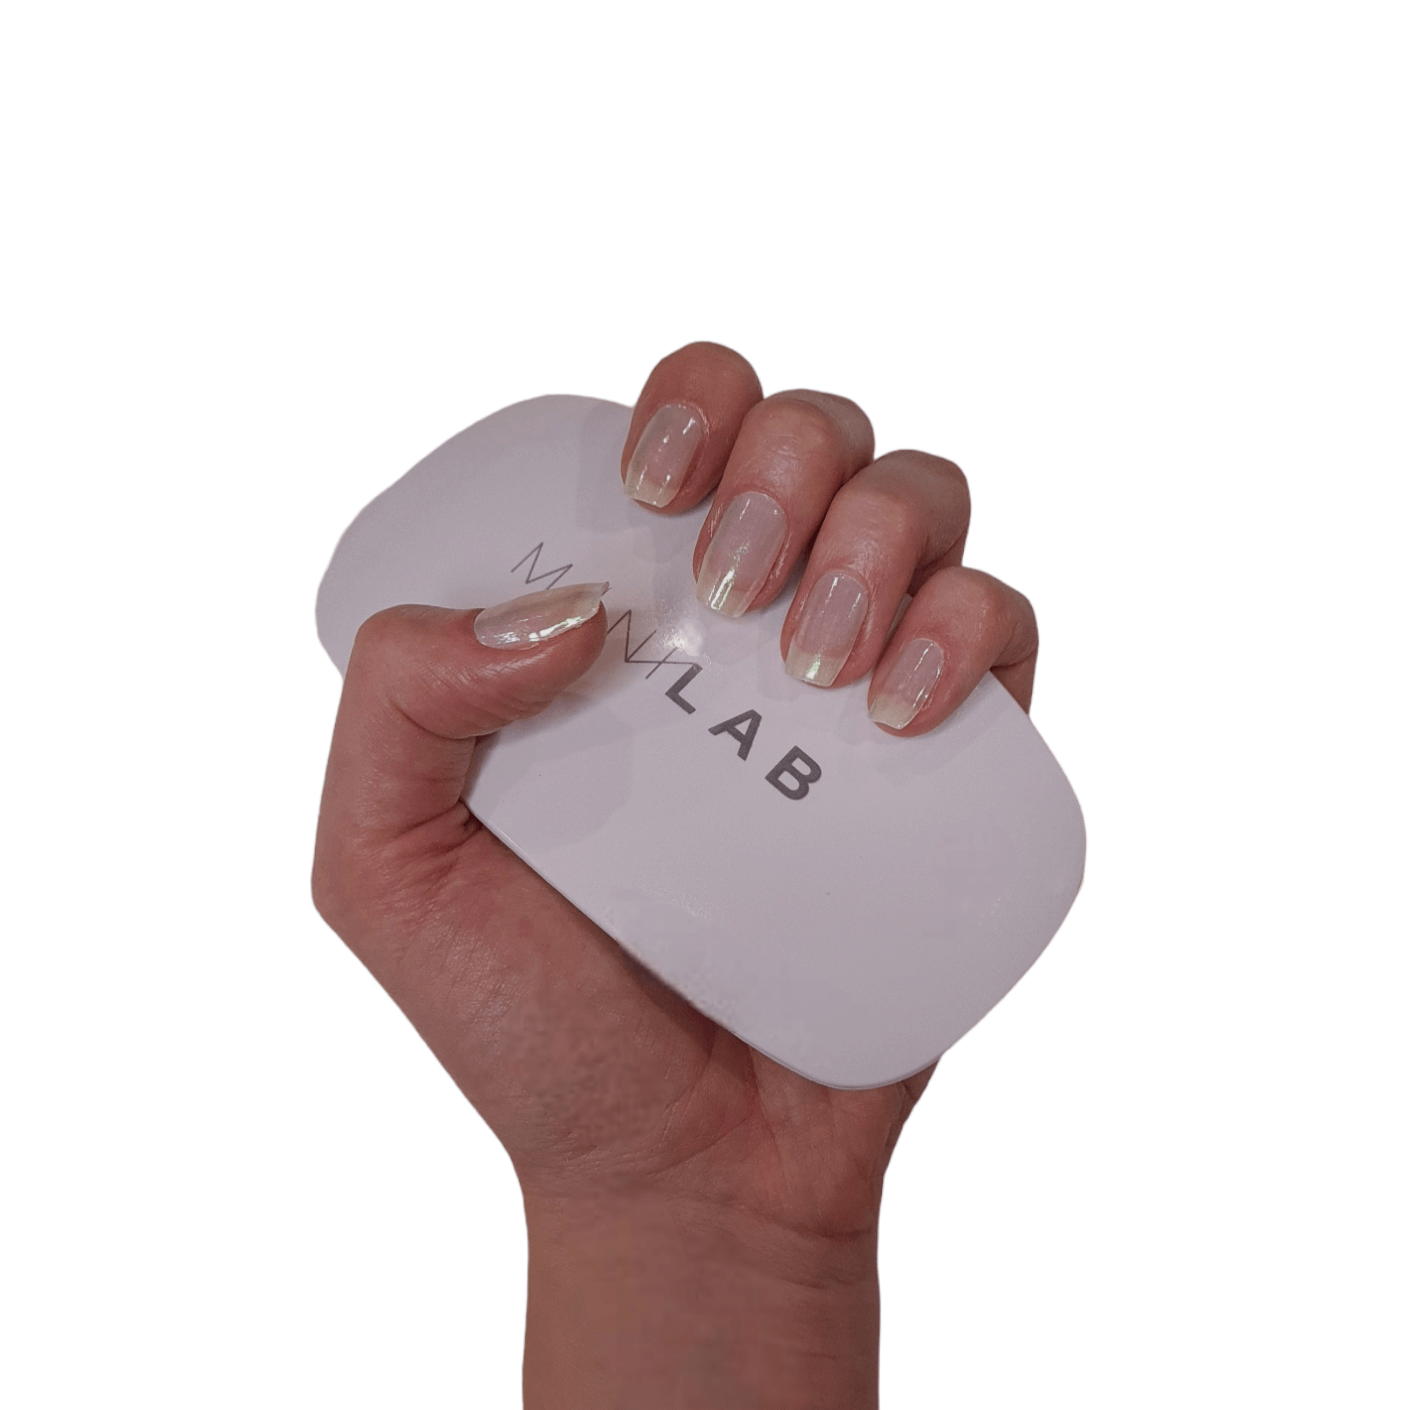 Our glazed semi-cured gel nails displayed on a hand 